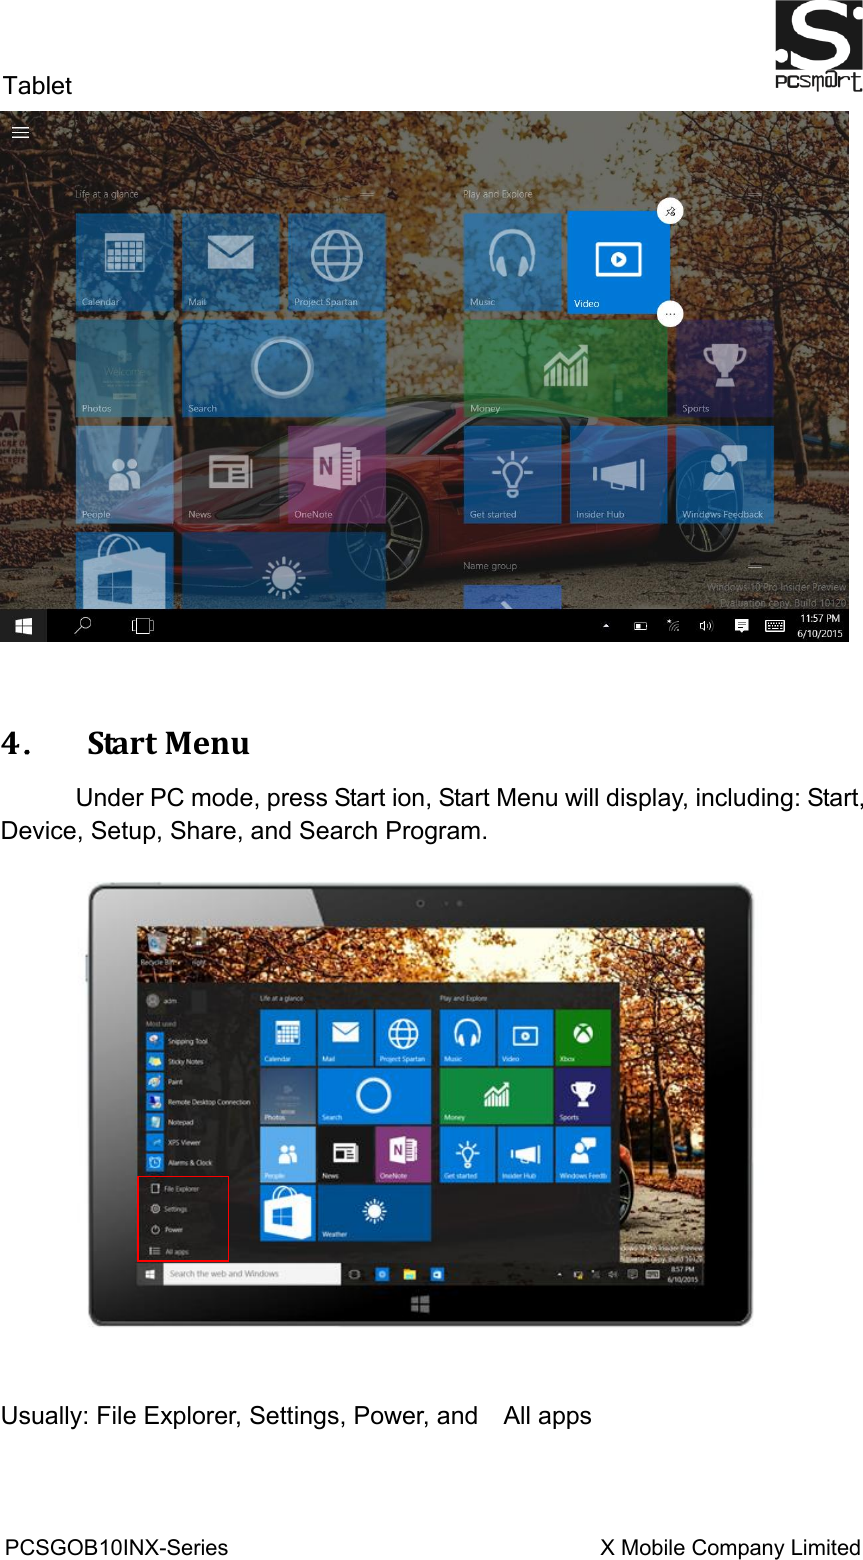 Tablet                                                          PCSGOB10INX-Series                                                                  X Mobile Company Limited                             4．  Start Menu         Under PC mode, press Start ion, Start Menu will display, including: Start, Device, Setup, Share, and Search Program.      Usually: File Explorer, Settings, Power, and    All apps    